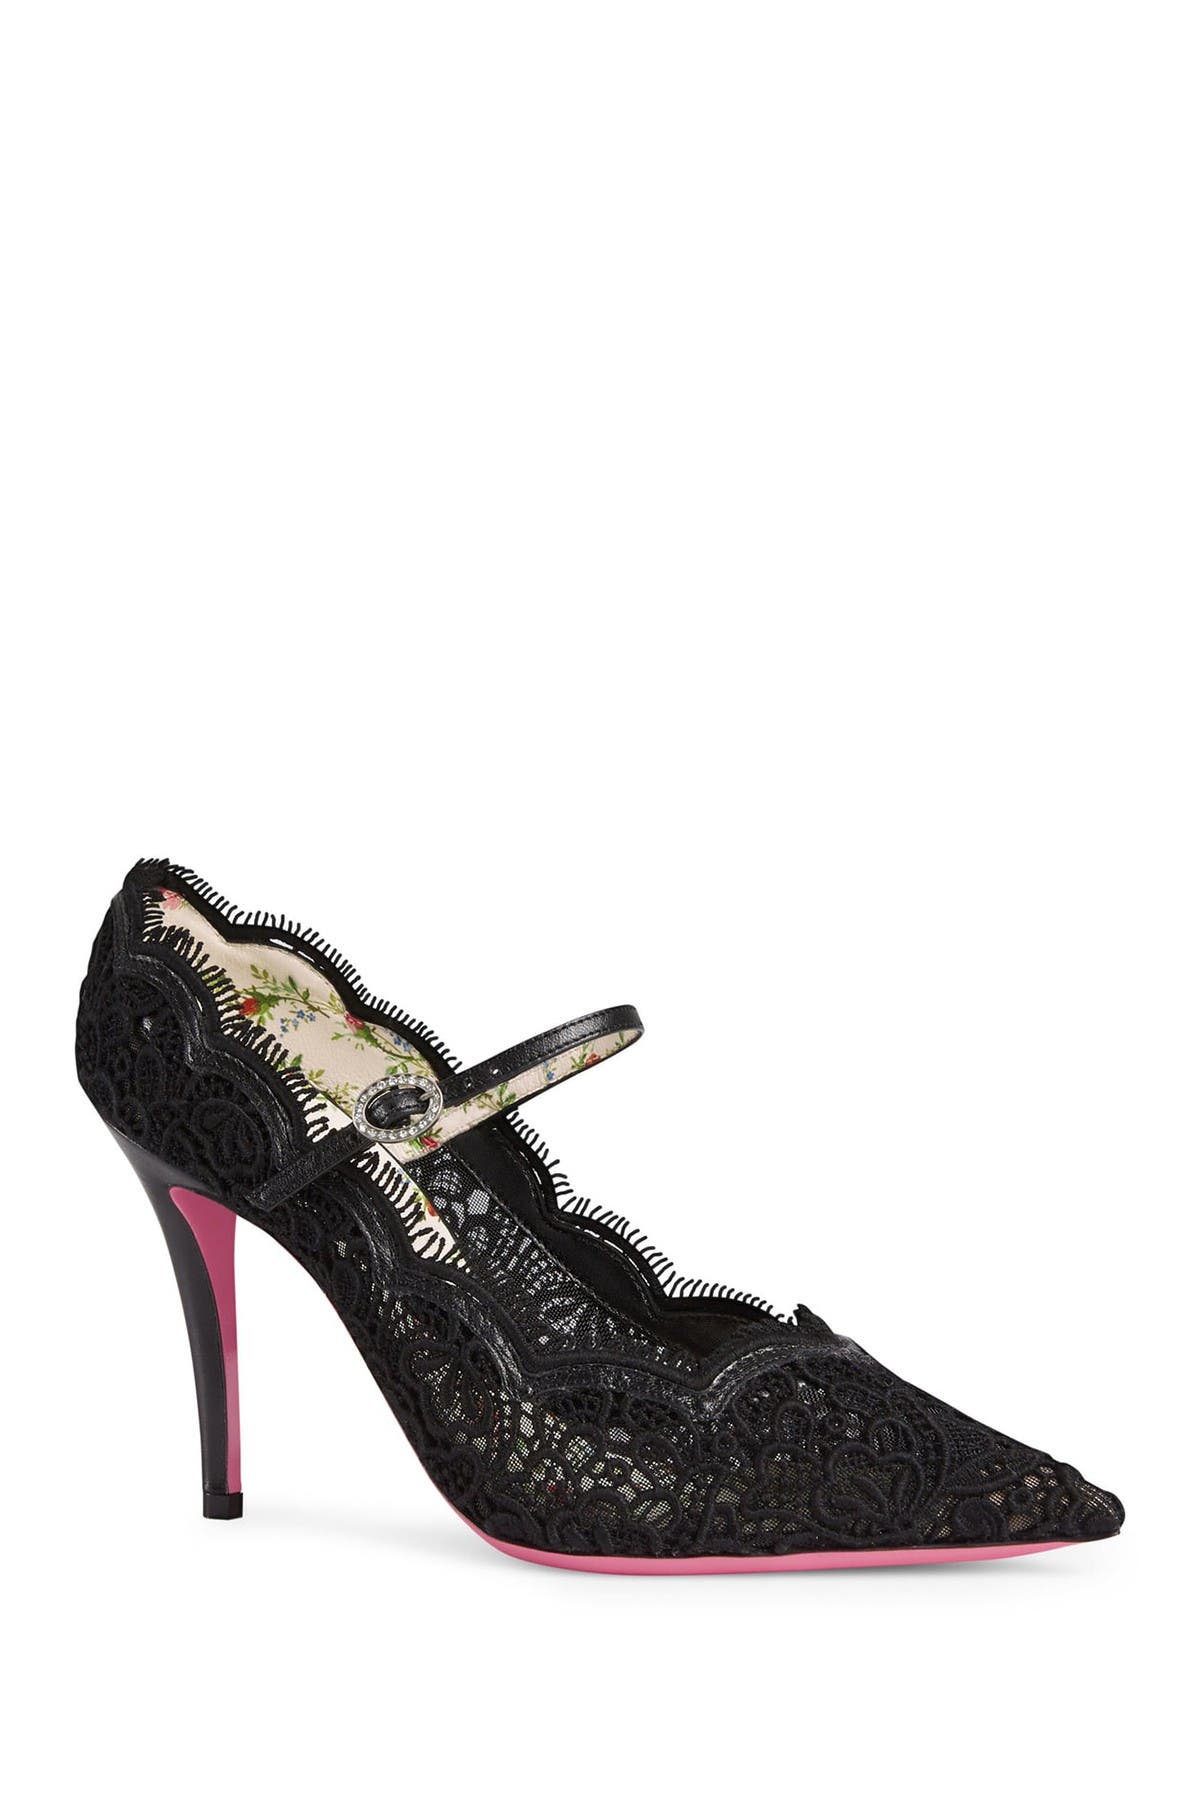 GUCCI | Virginia Lace Mary Jane Pump 